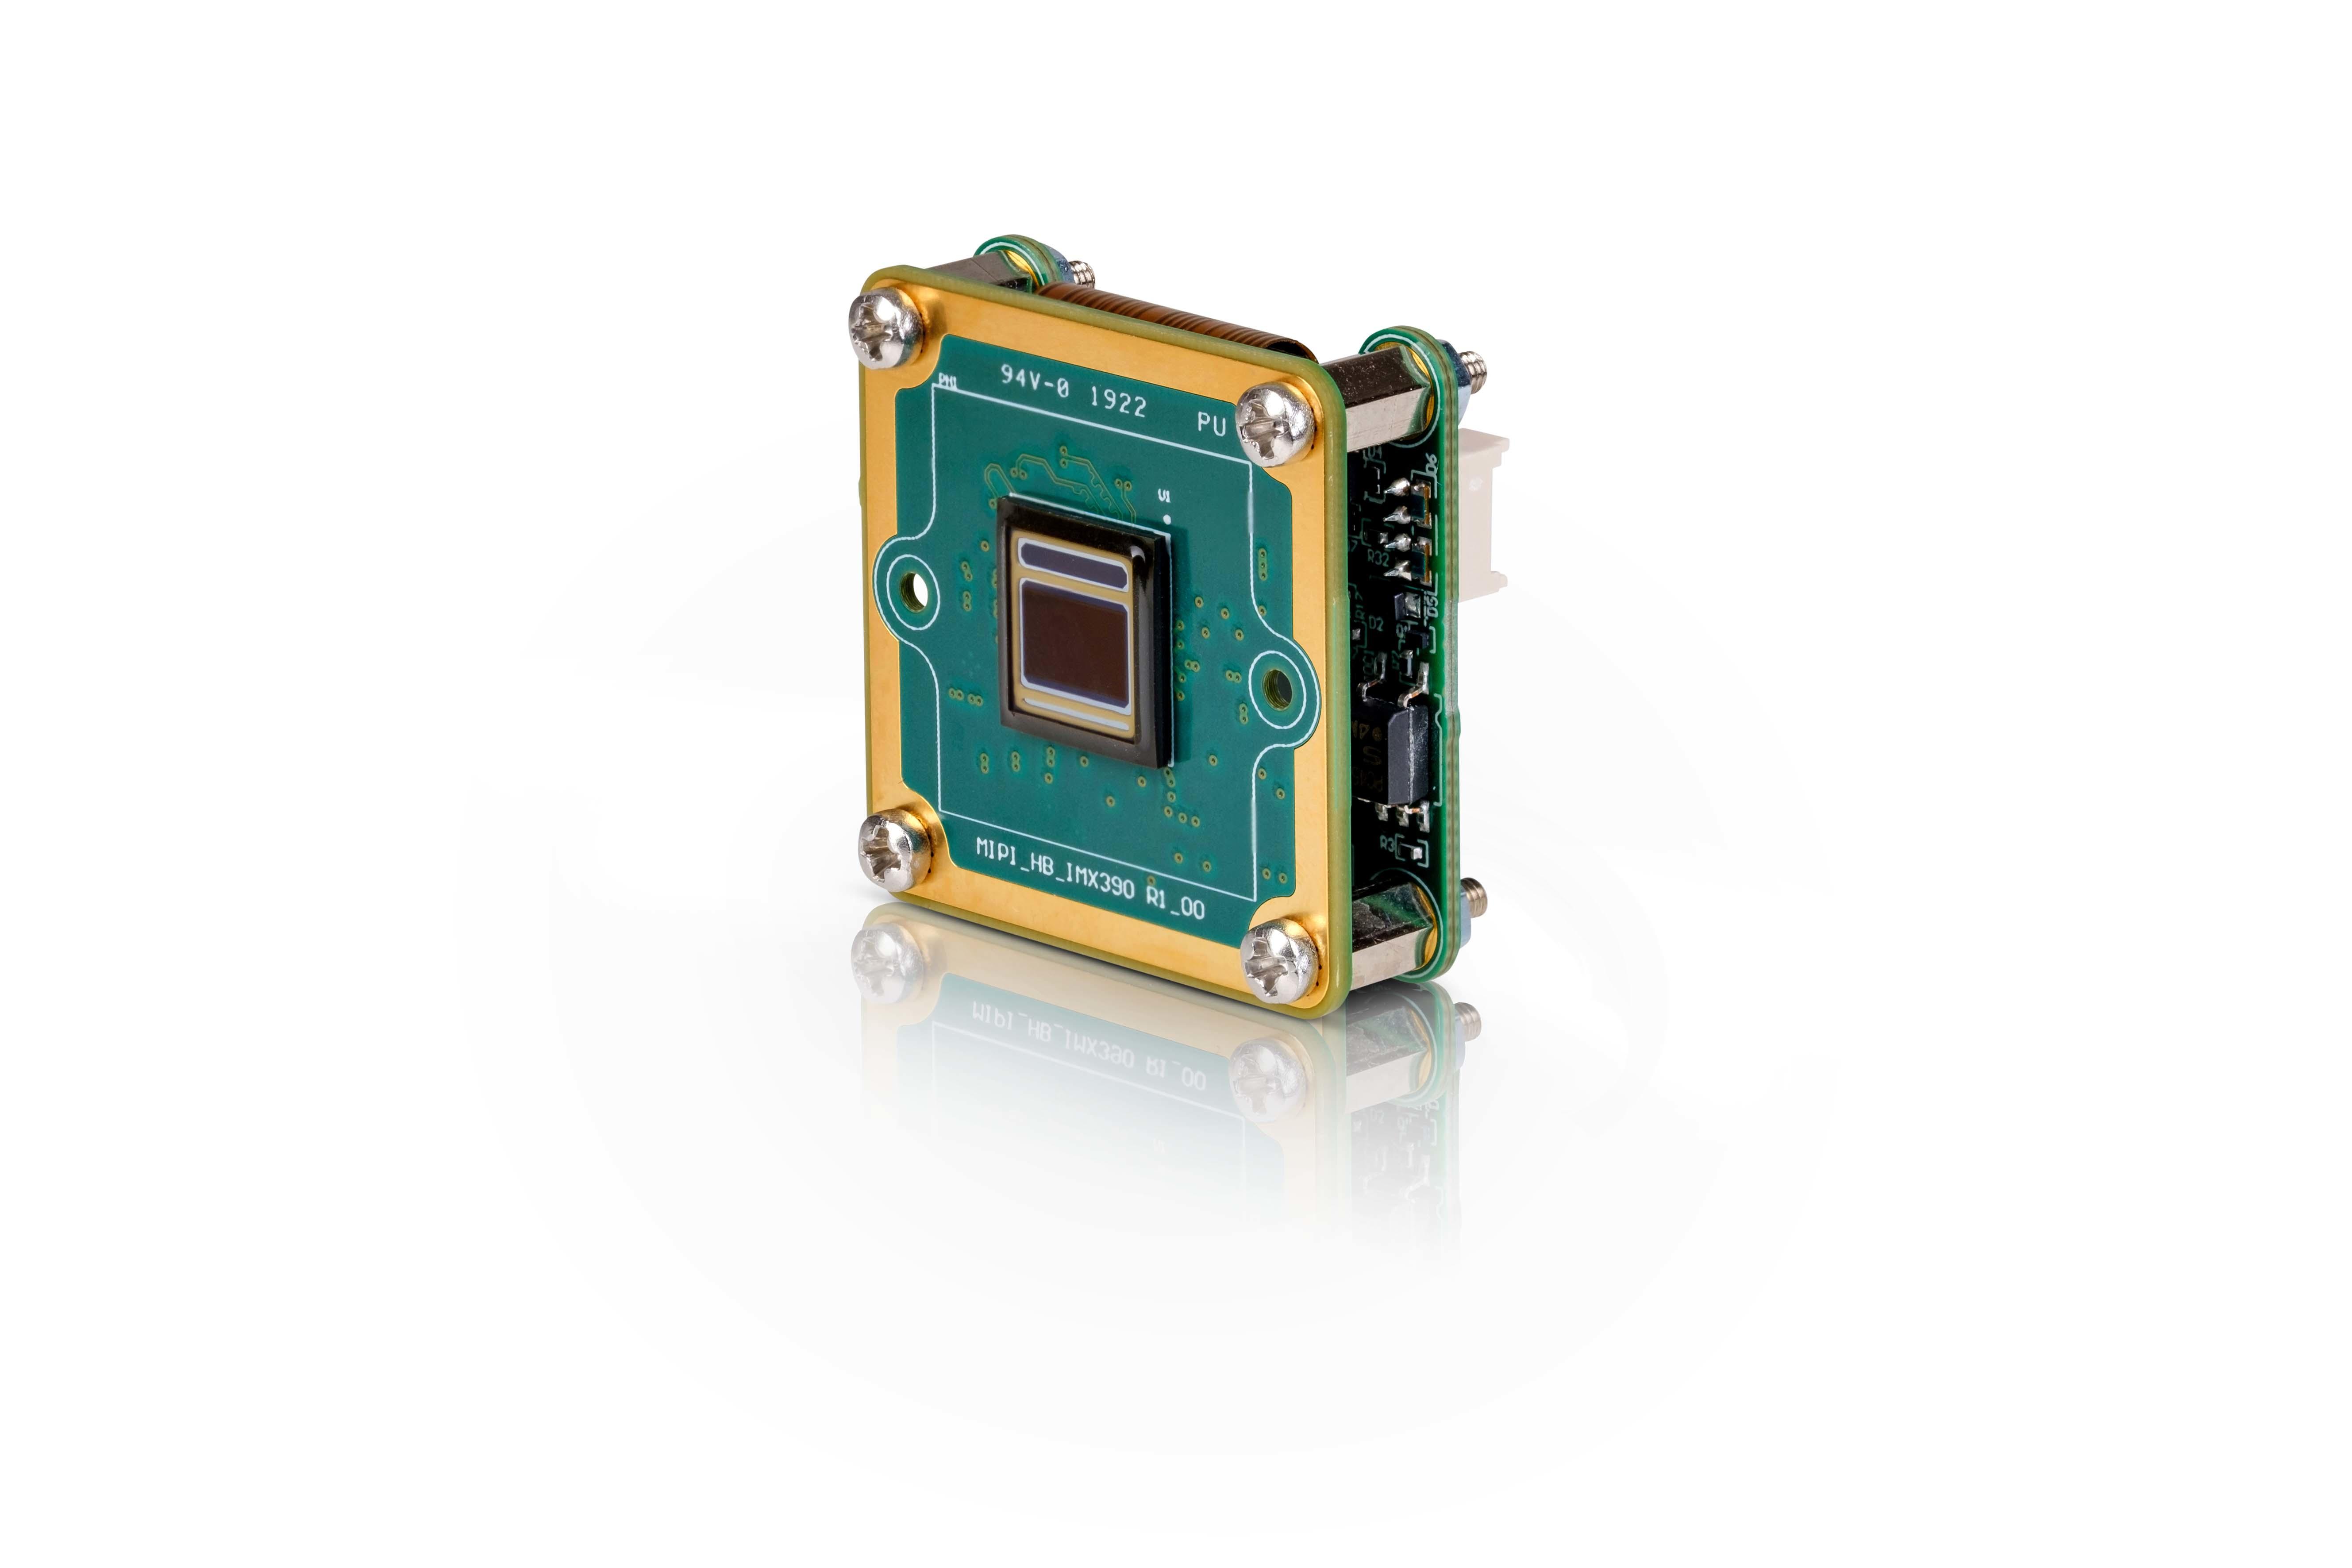 The Imaging Source 2.1MP 1/2.8" Embedded Board Camera